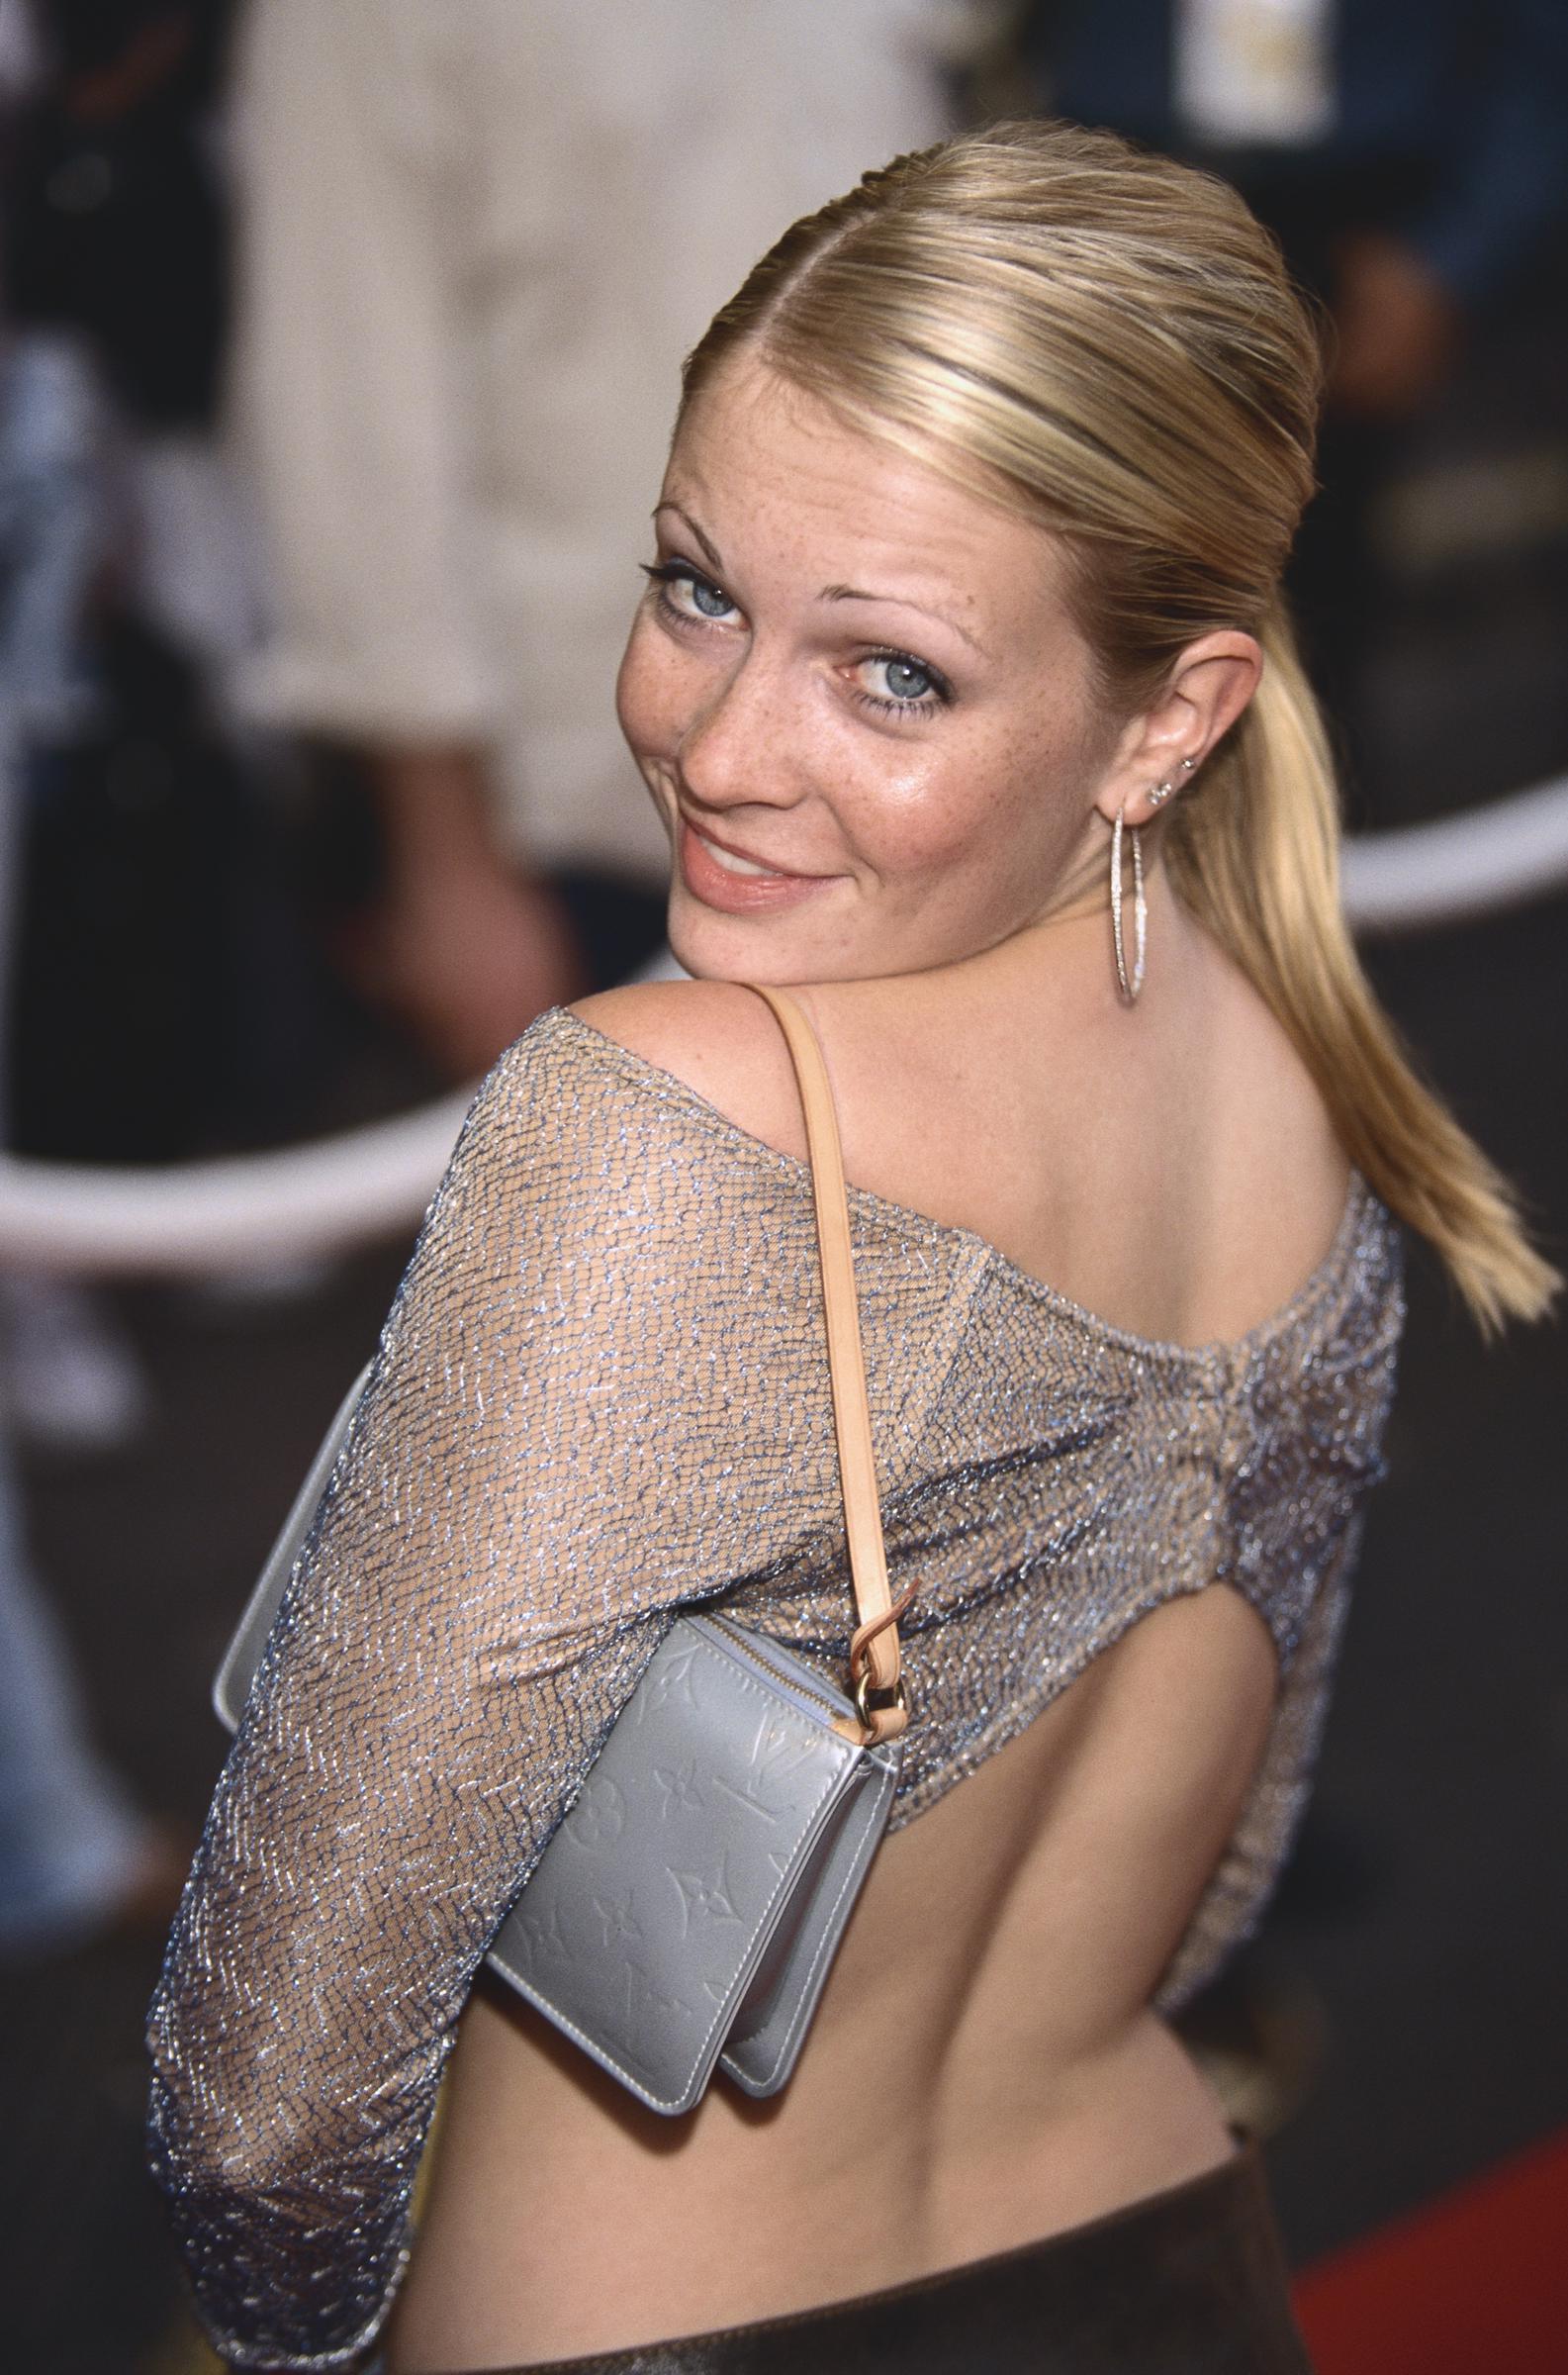 The child star looking over her shoulder in 2002. | Source: Getty Images